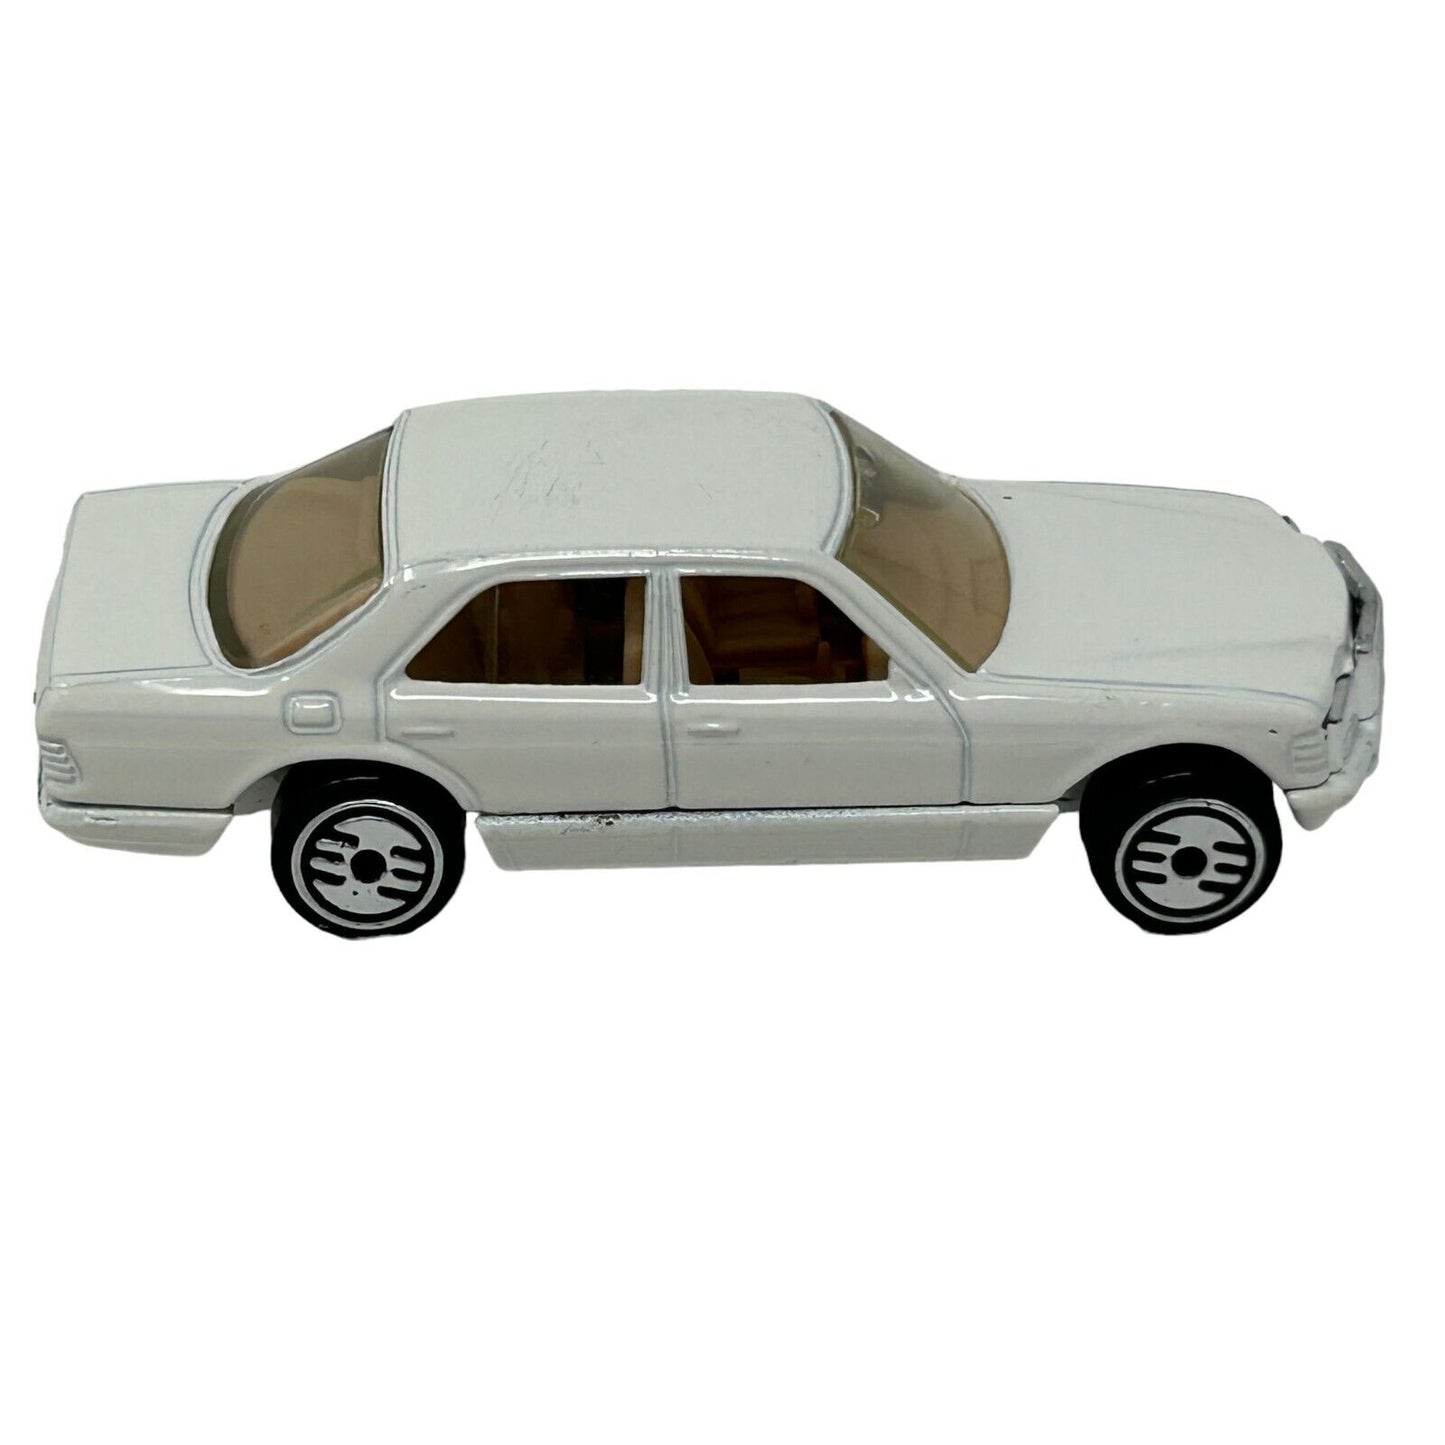 Mercedes-Benz 380 SEL Hot Wheels Collectible Diecast Car White W126 Vintage 80s